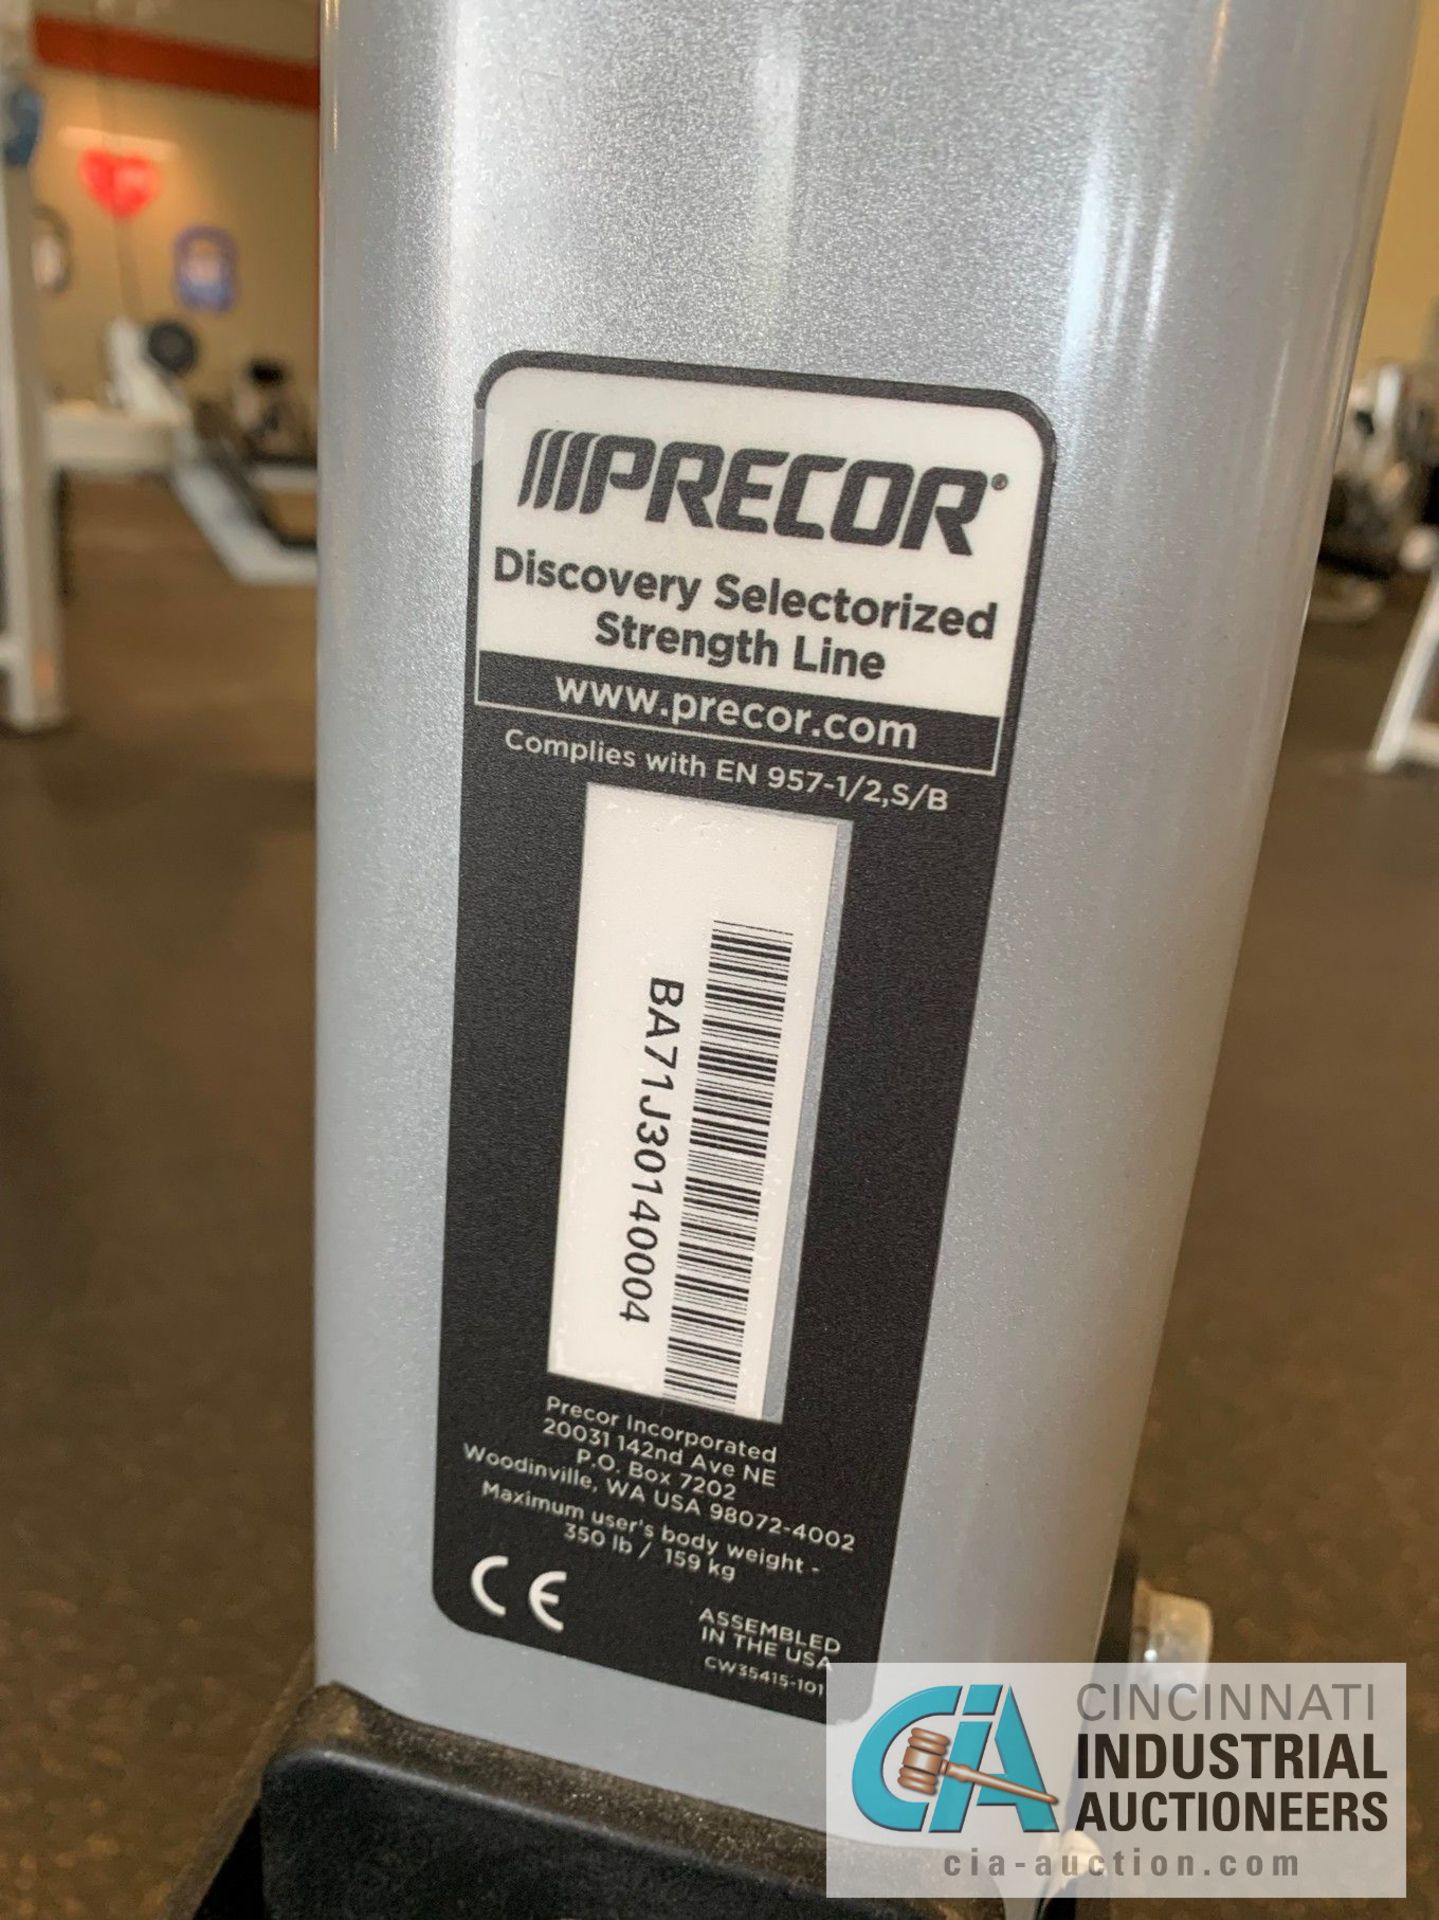 PRECOR REAR DELT/PEC FLY SELECTORIZED STRENGTH TRAINING MACHINES - Image 6 of 6